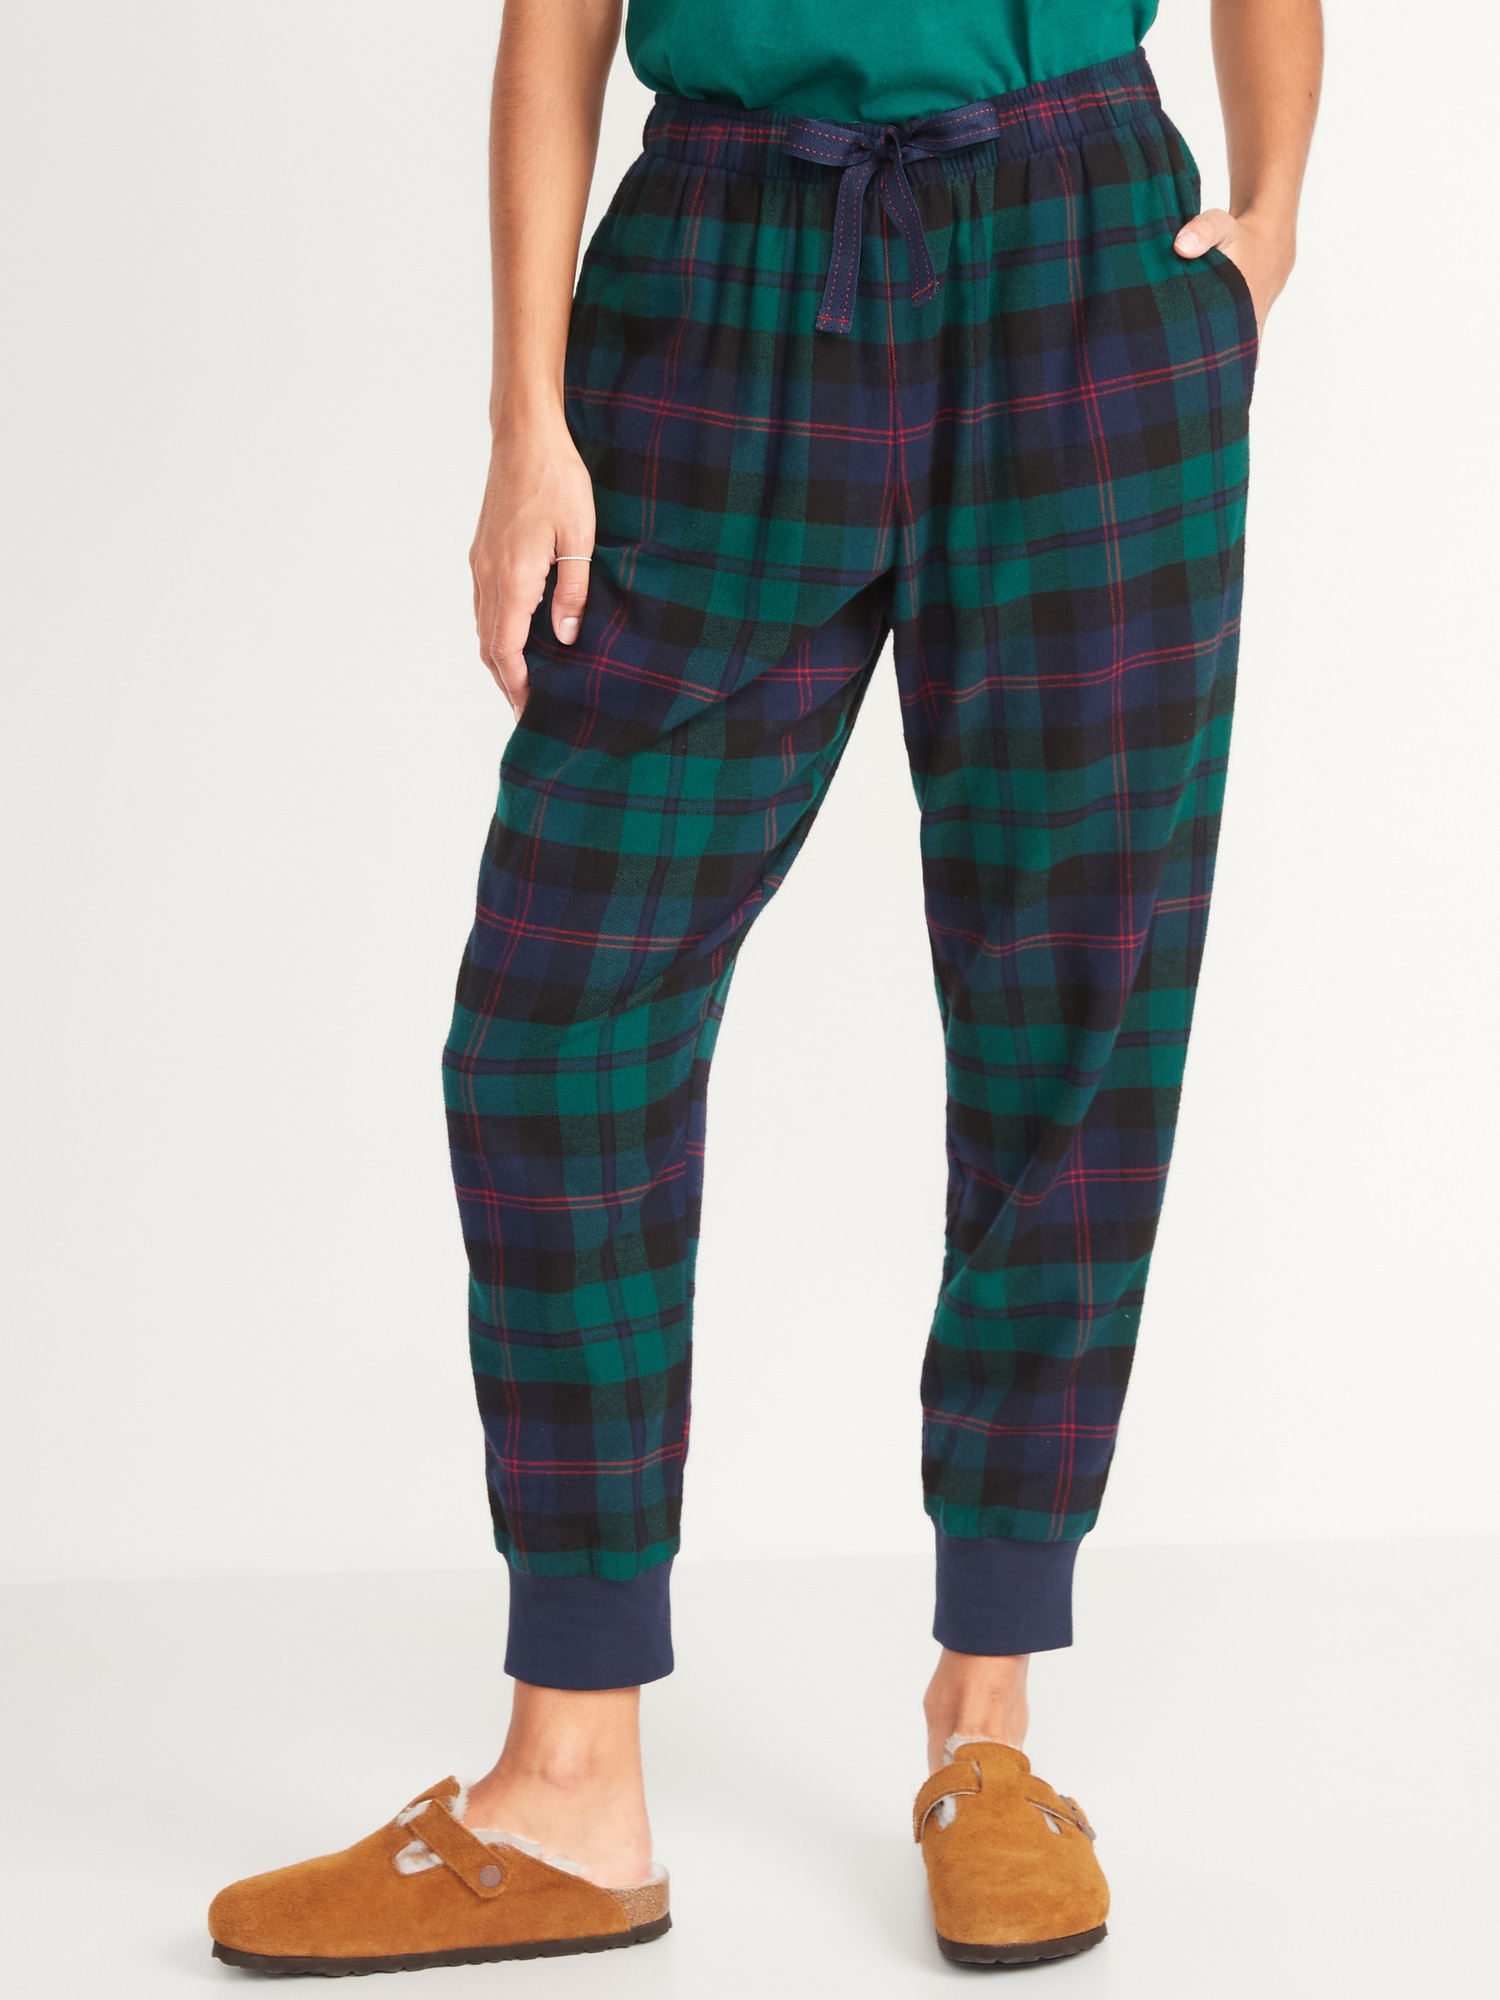 Old Navy Printed Flannel Jogger Pajama Pants for Women multi. 1